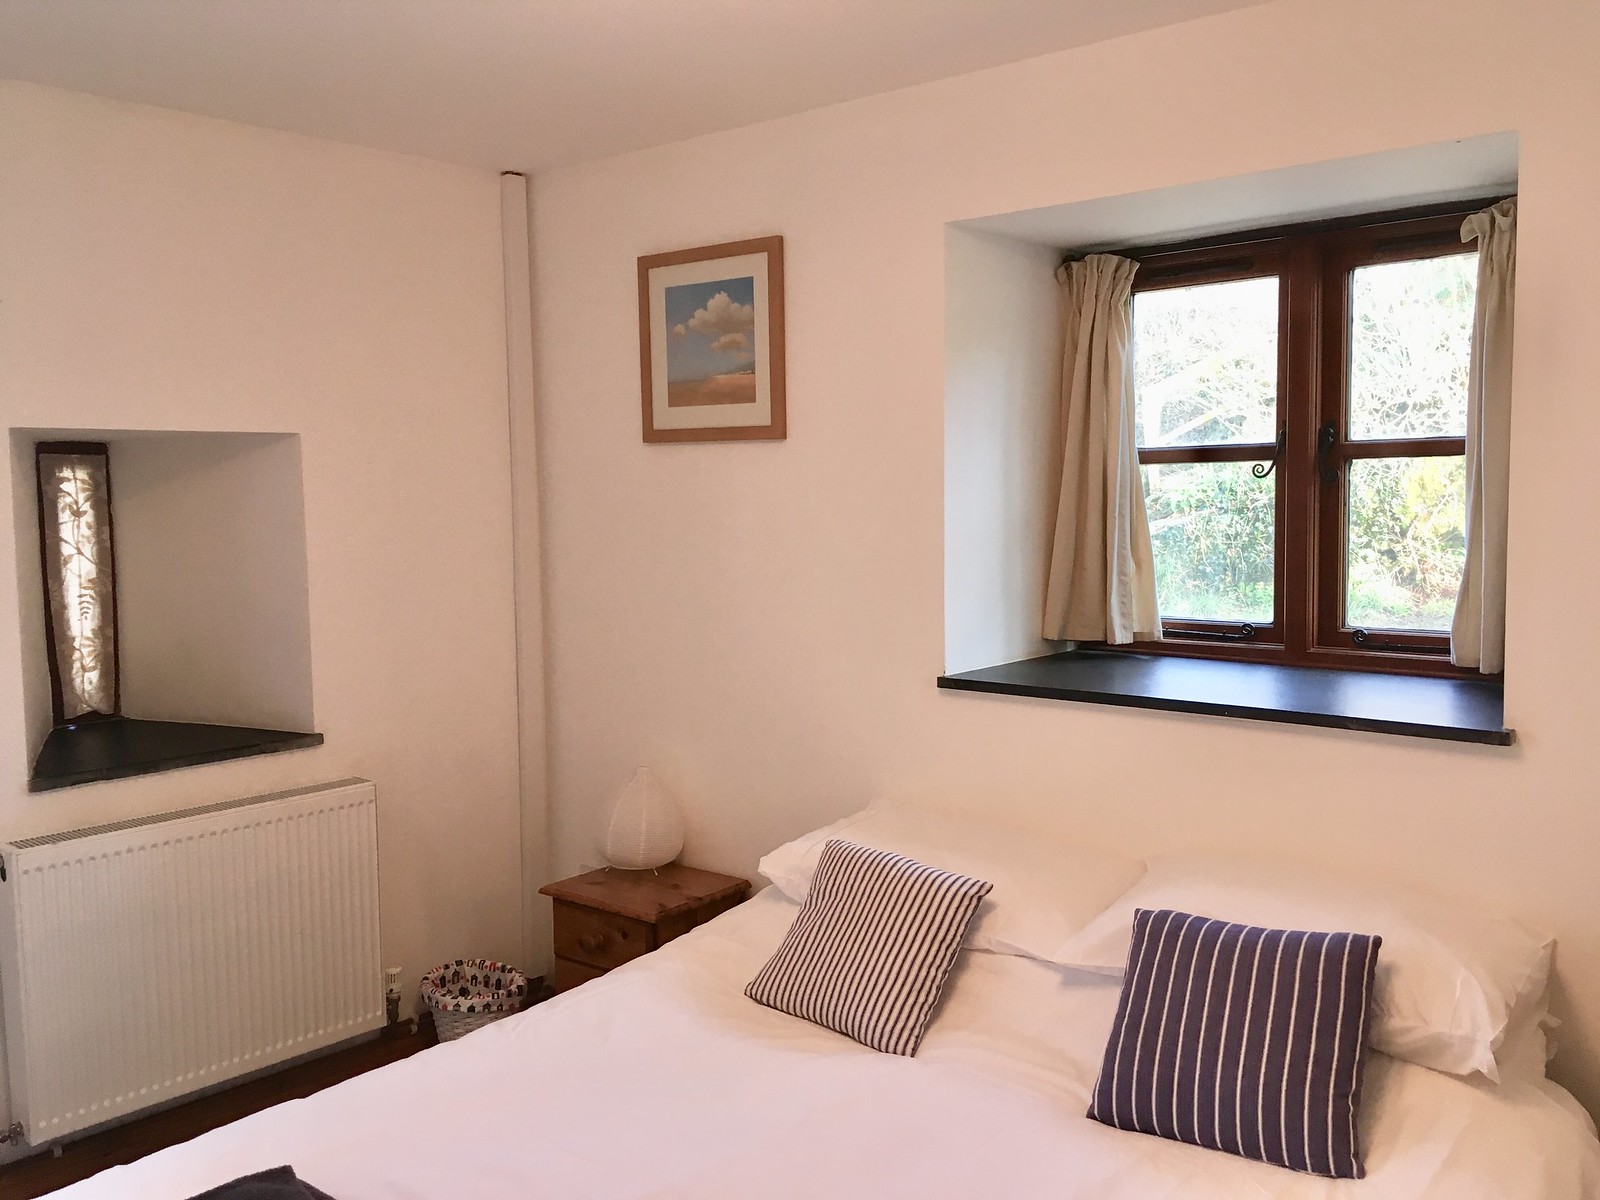 Godrevy Barn - double or twin room